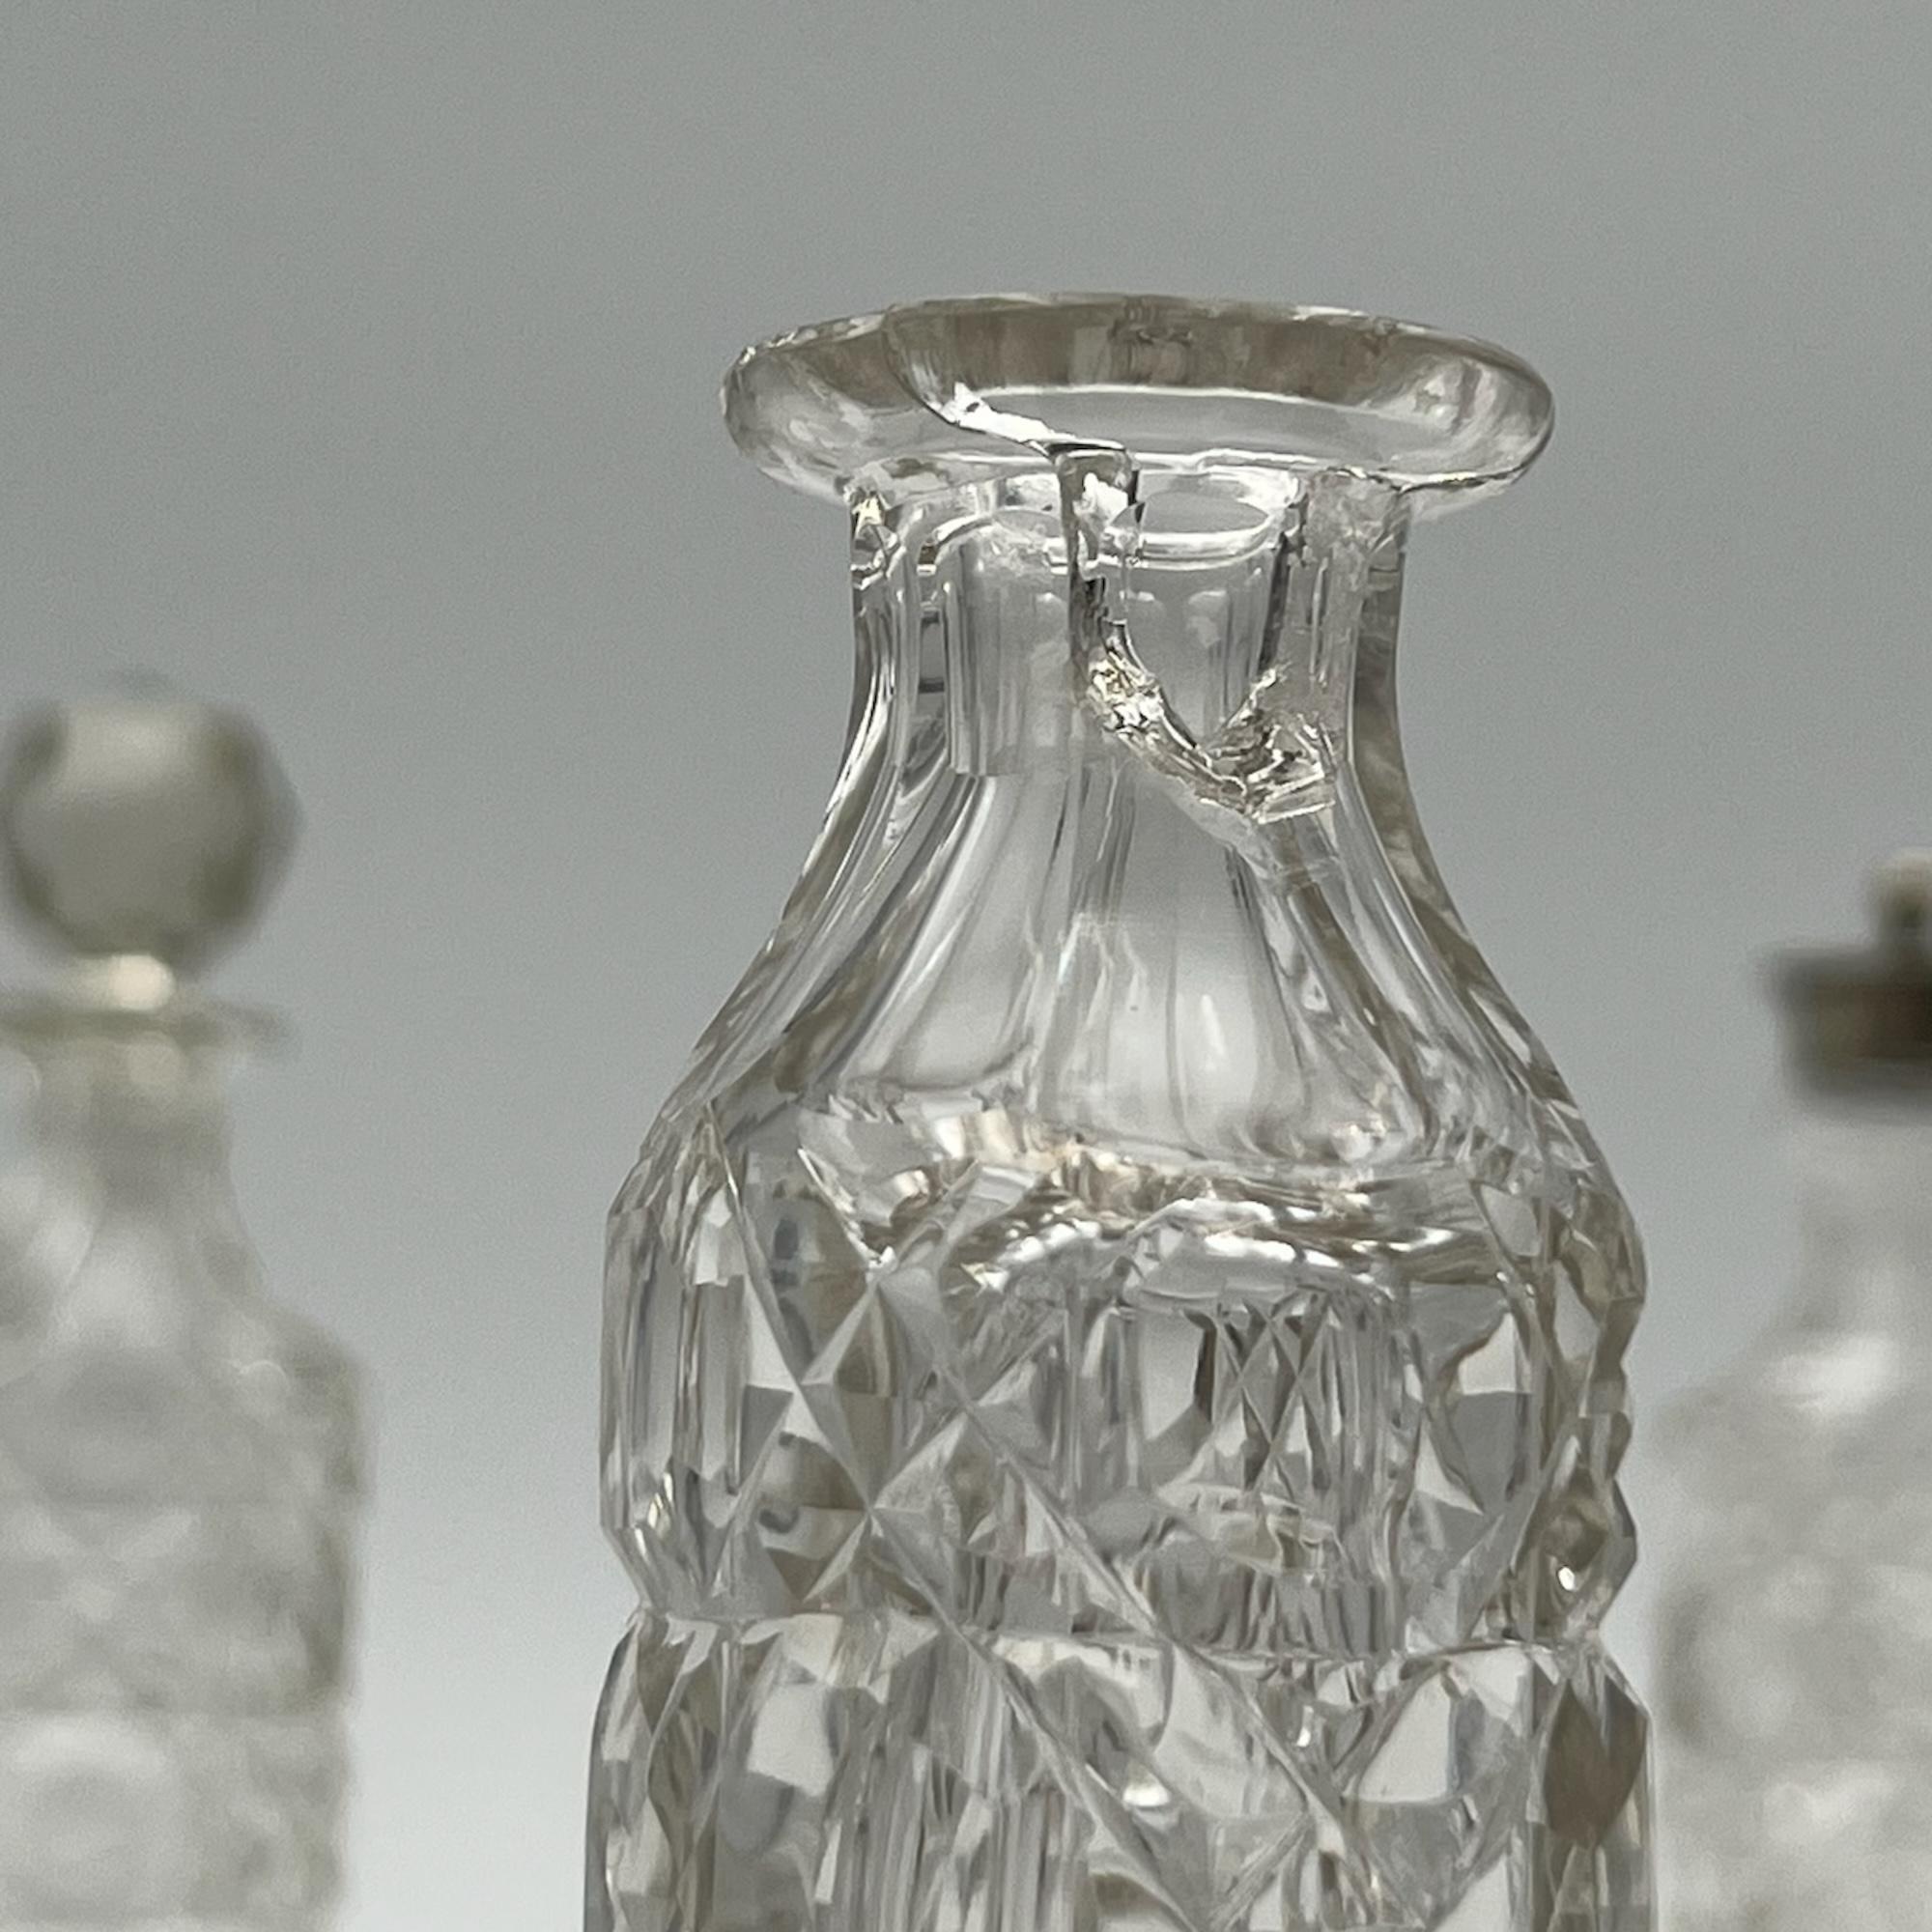 Rare 1940s Crystal Ampoule Set with Accessories - English Craftsmanship 2